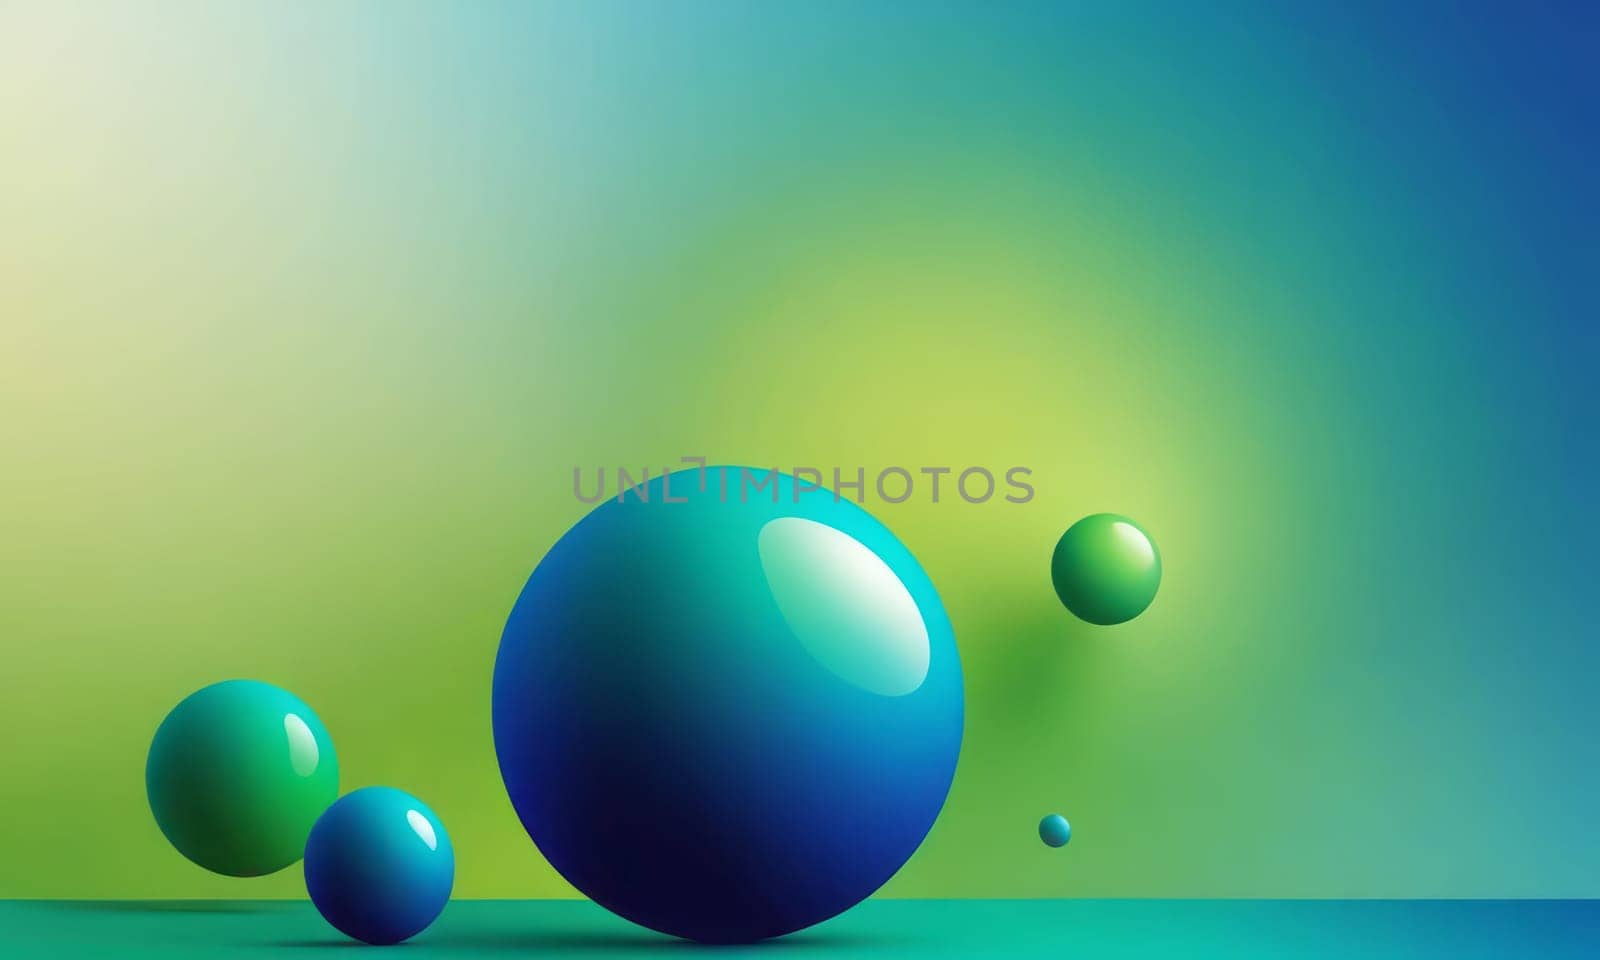 Spherical Shapes in Blue Green by nkotlyar